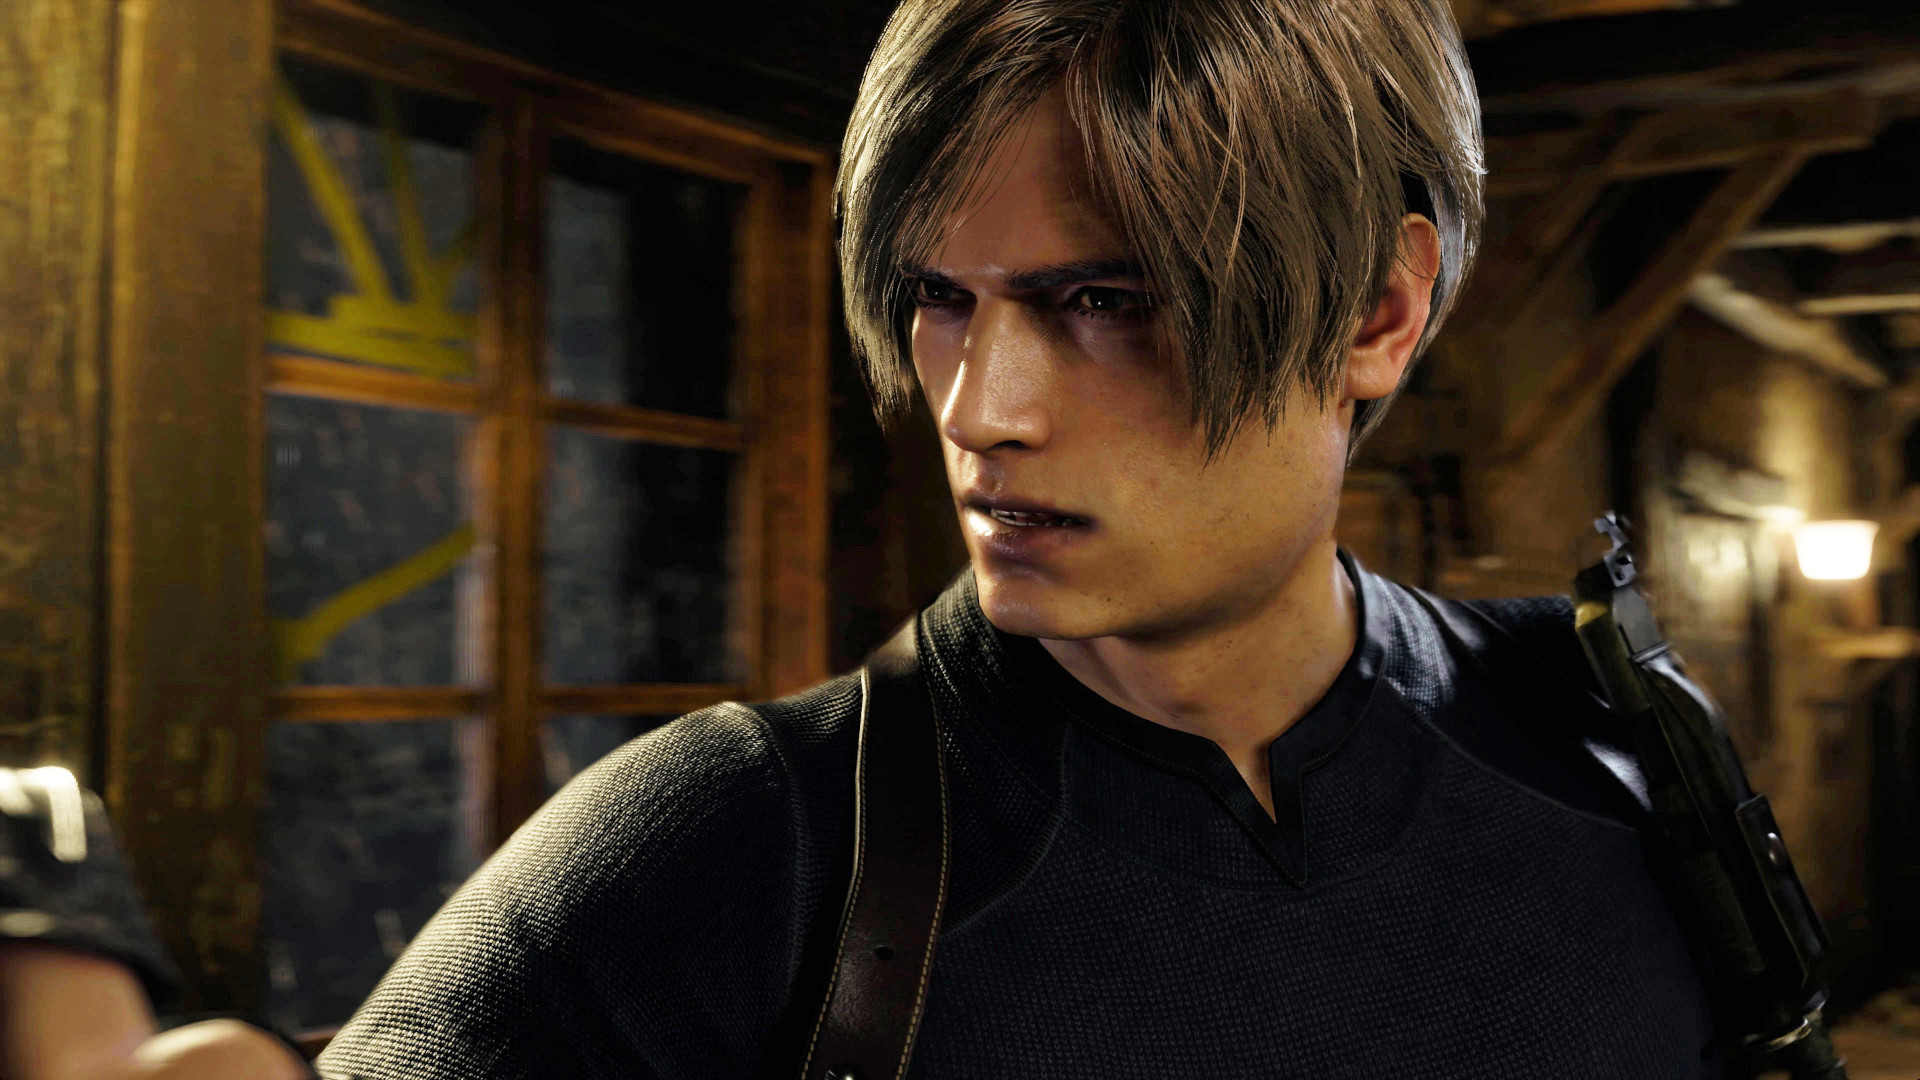 Get Resident Evil 4 for free when you buy an AMD Radeon GPU